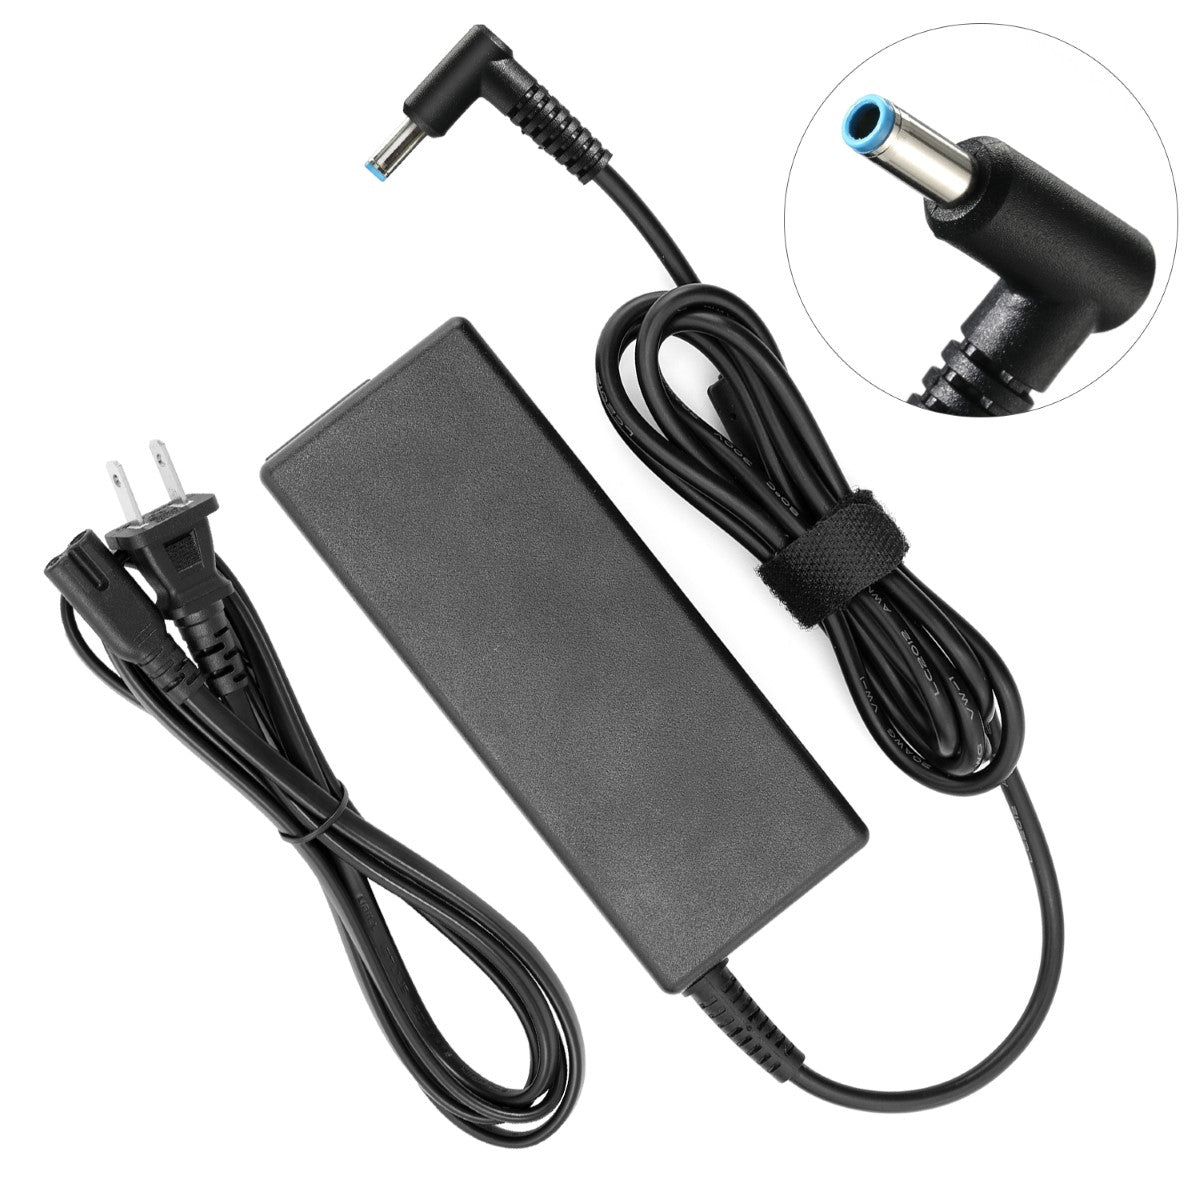 AC Adapter Charger for HP Envy Touchsmart 17-j041nr Notebook.